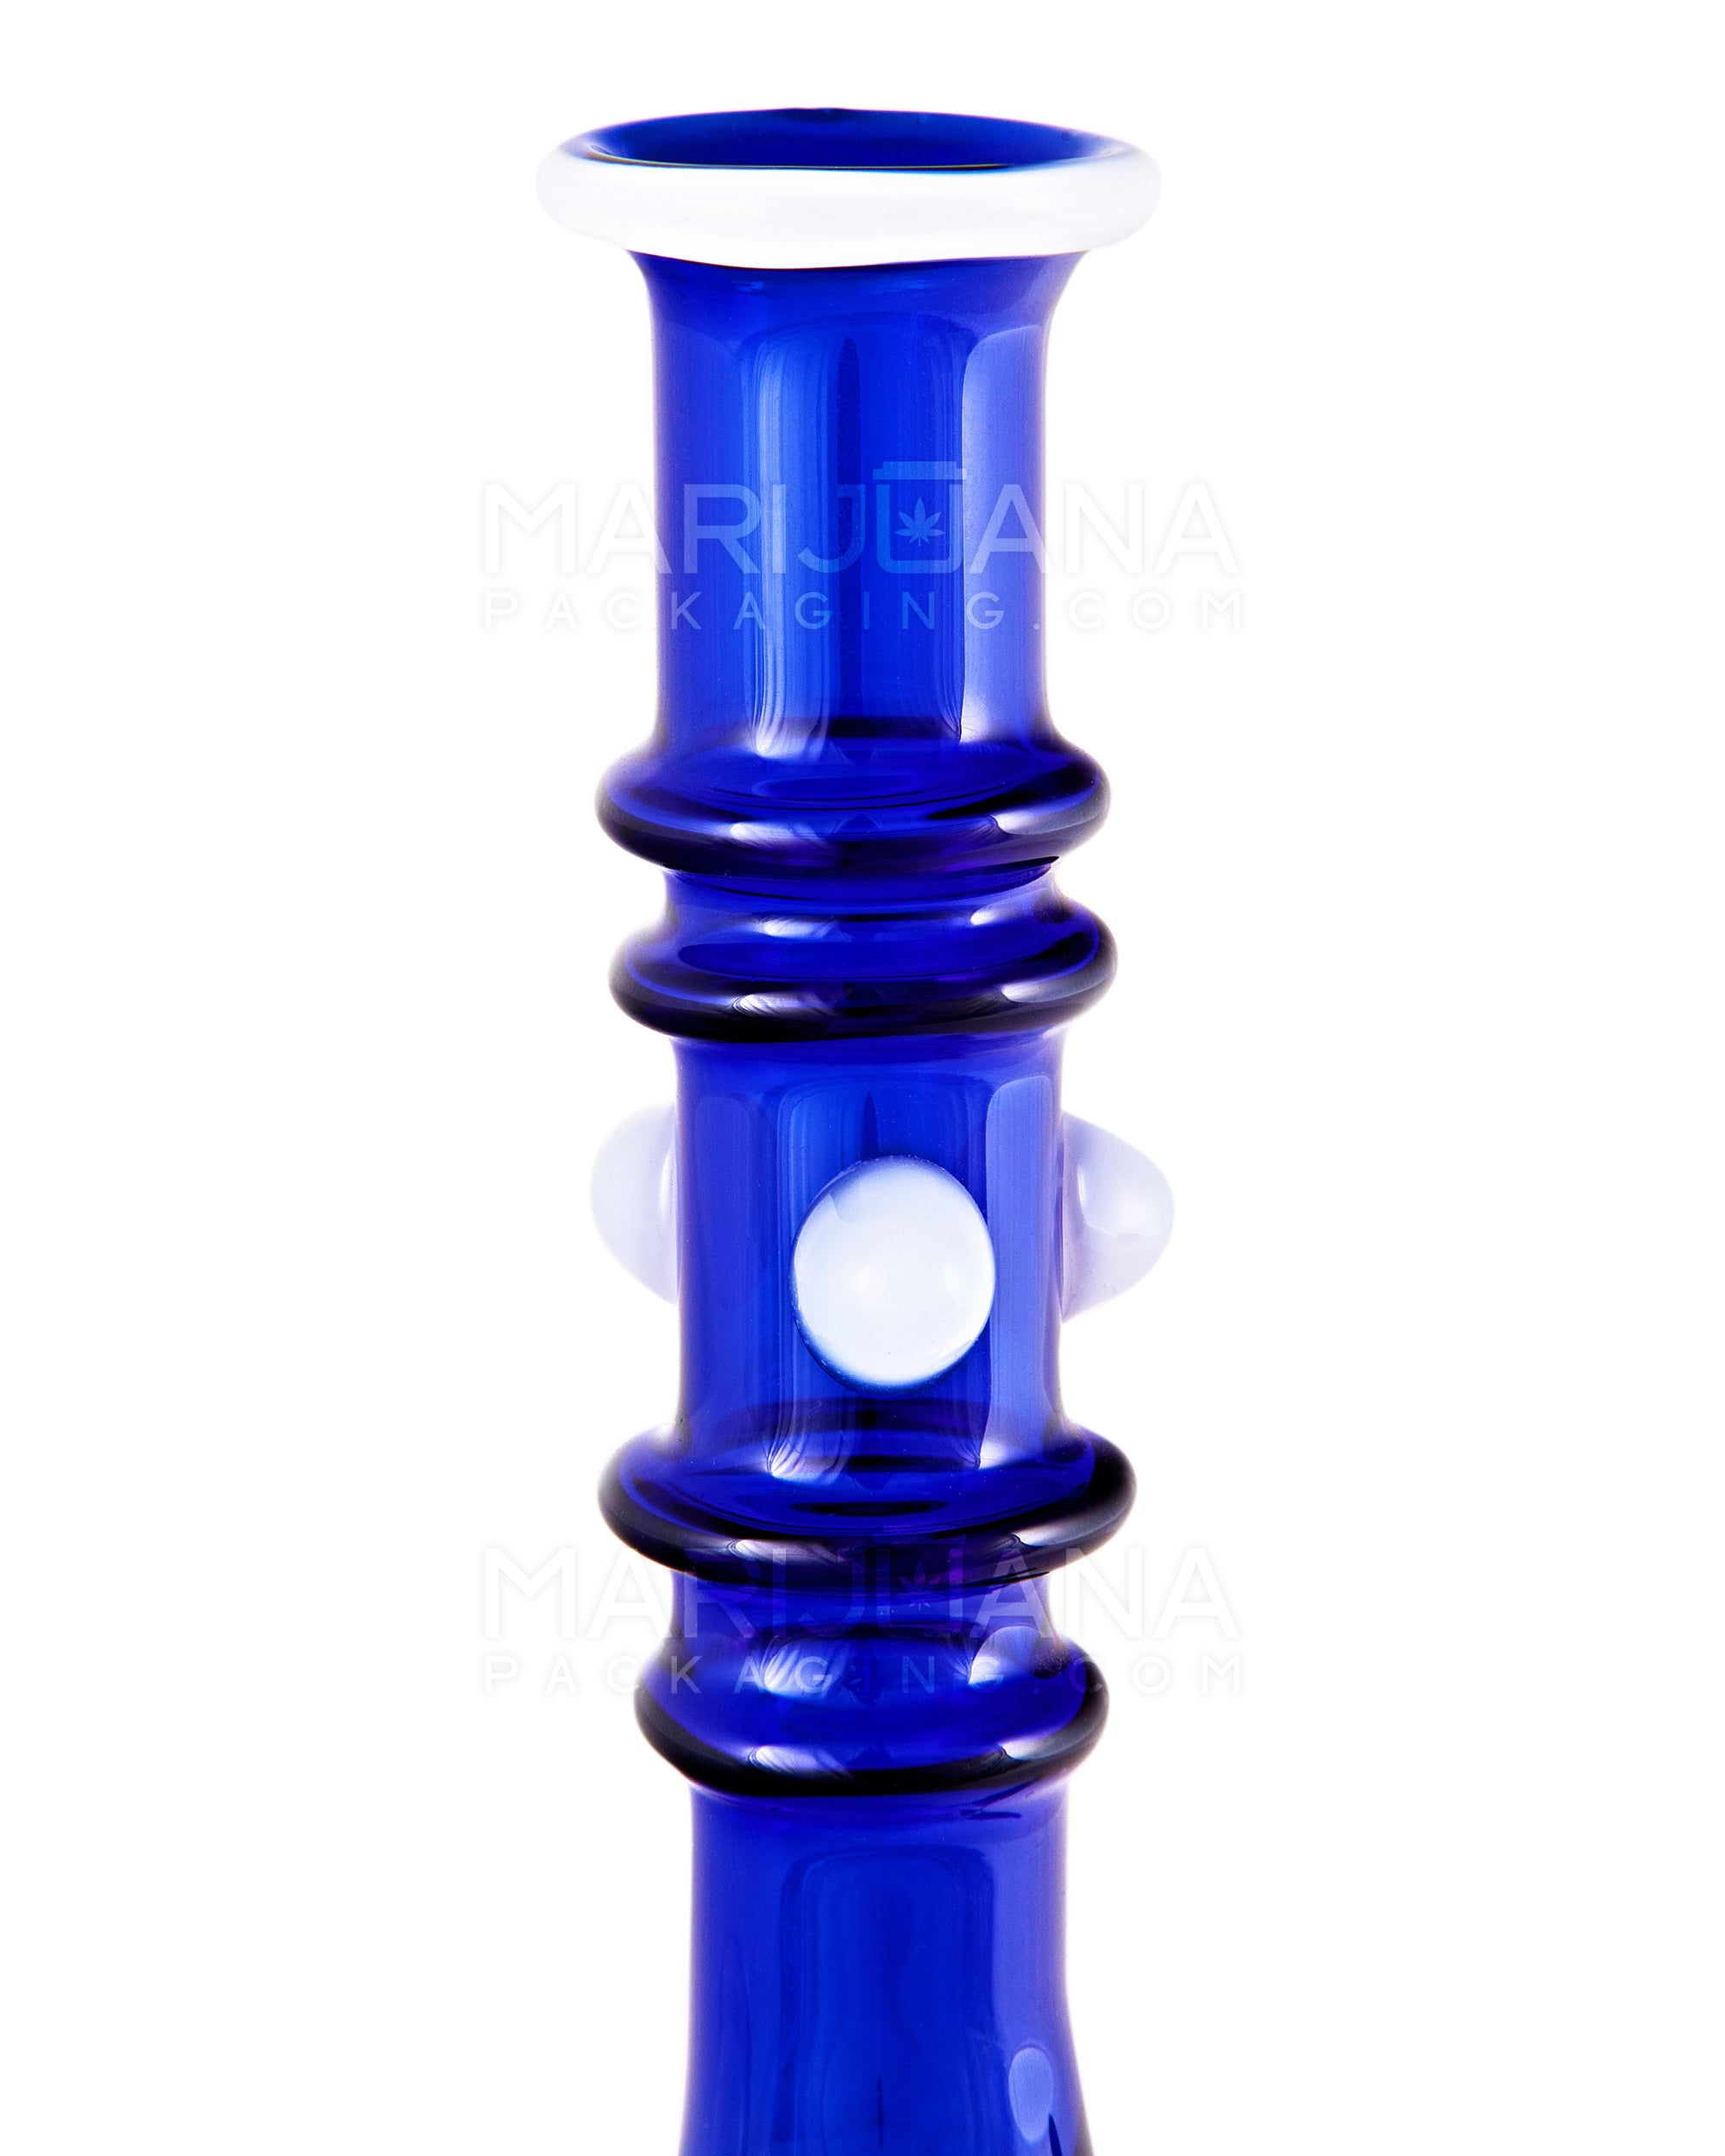 Straight Neck Wig Wag Circular Flask Glass Water Pipe w/ Triple Spikes | 8in Tall - 14mm Bowl - Blue - 4